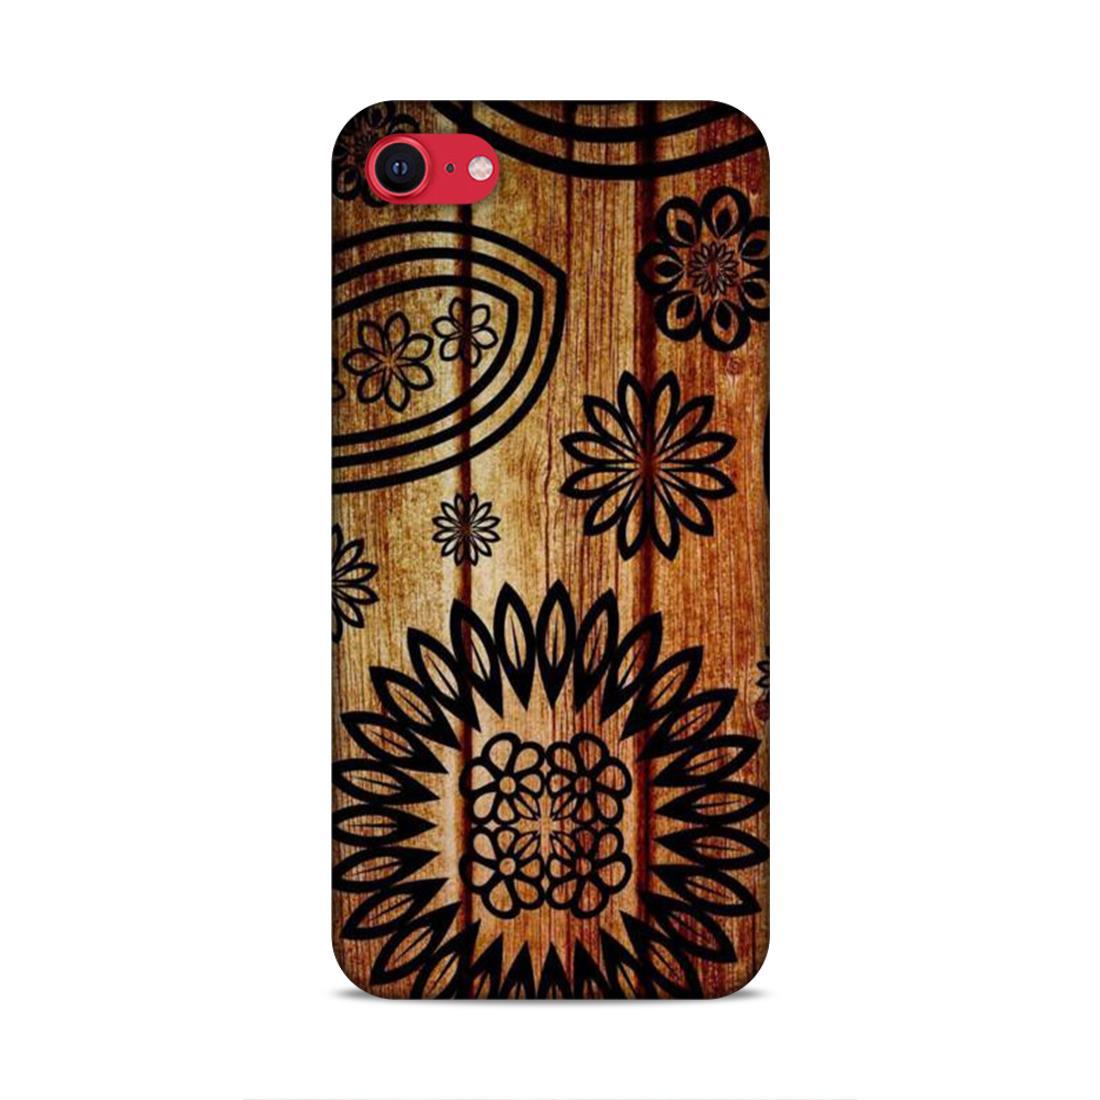 Wooden Look Pattern iPhone SE 2020 Mobile Case Cover